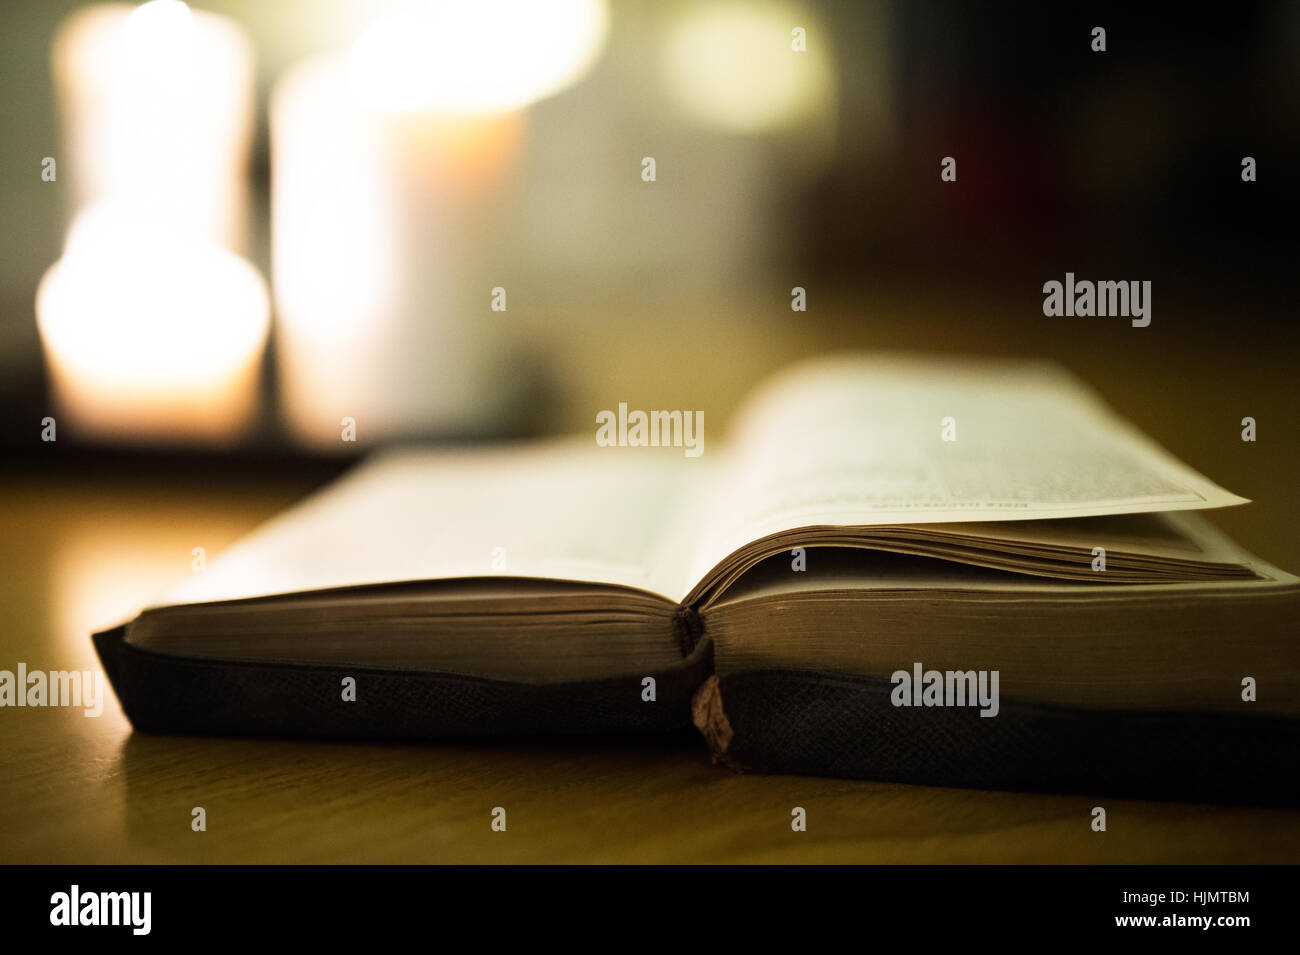 Bible laid on wooden floor, burning candles in the background Stock Photo